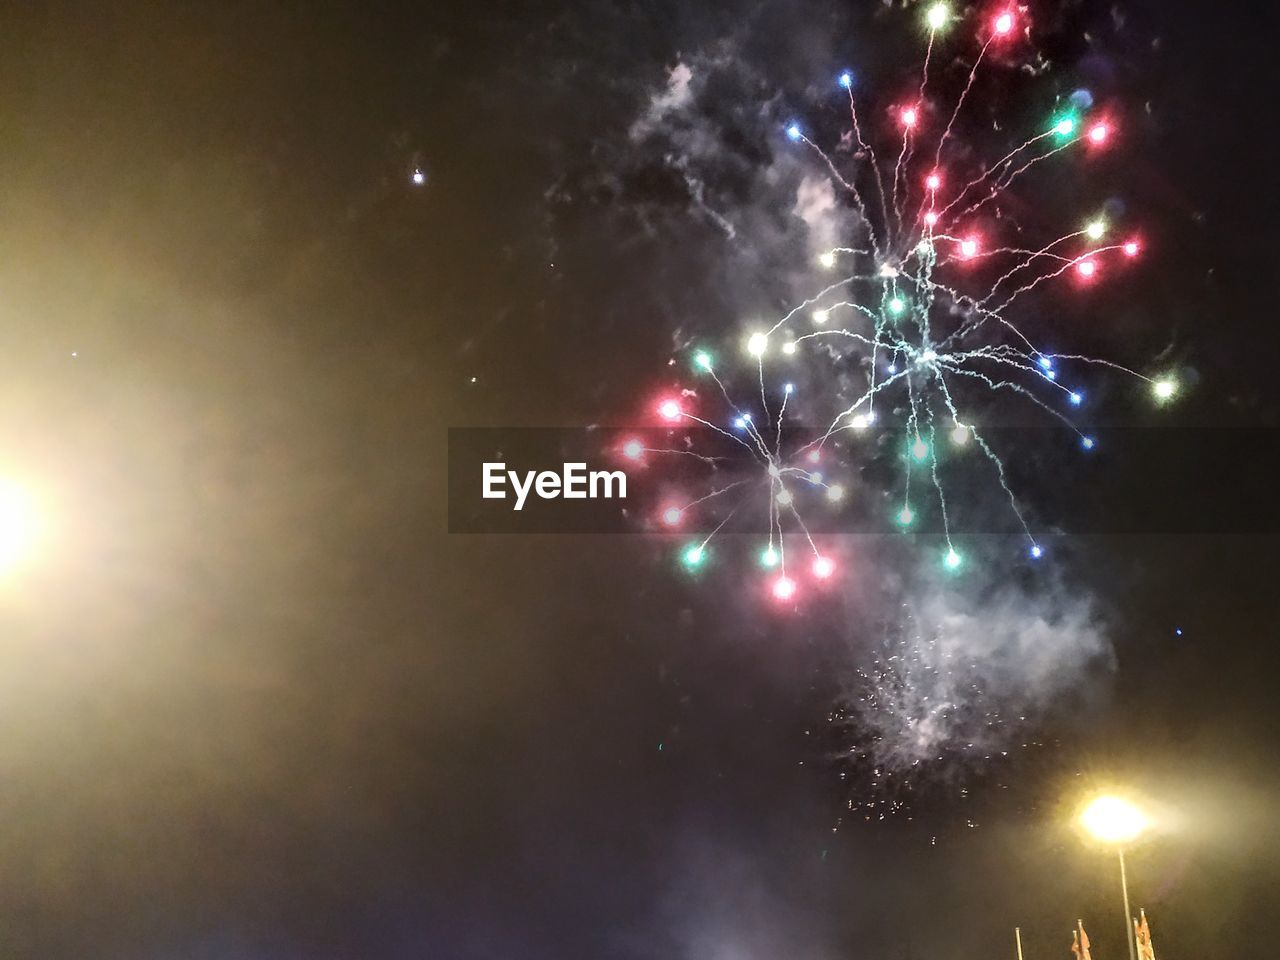 LOW ANGLE VIEW OF FIREWORKS IN SKY